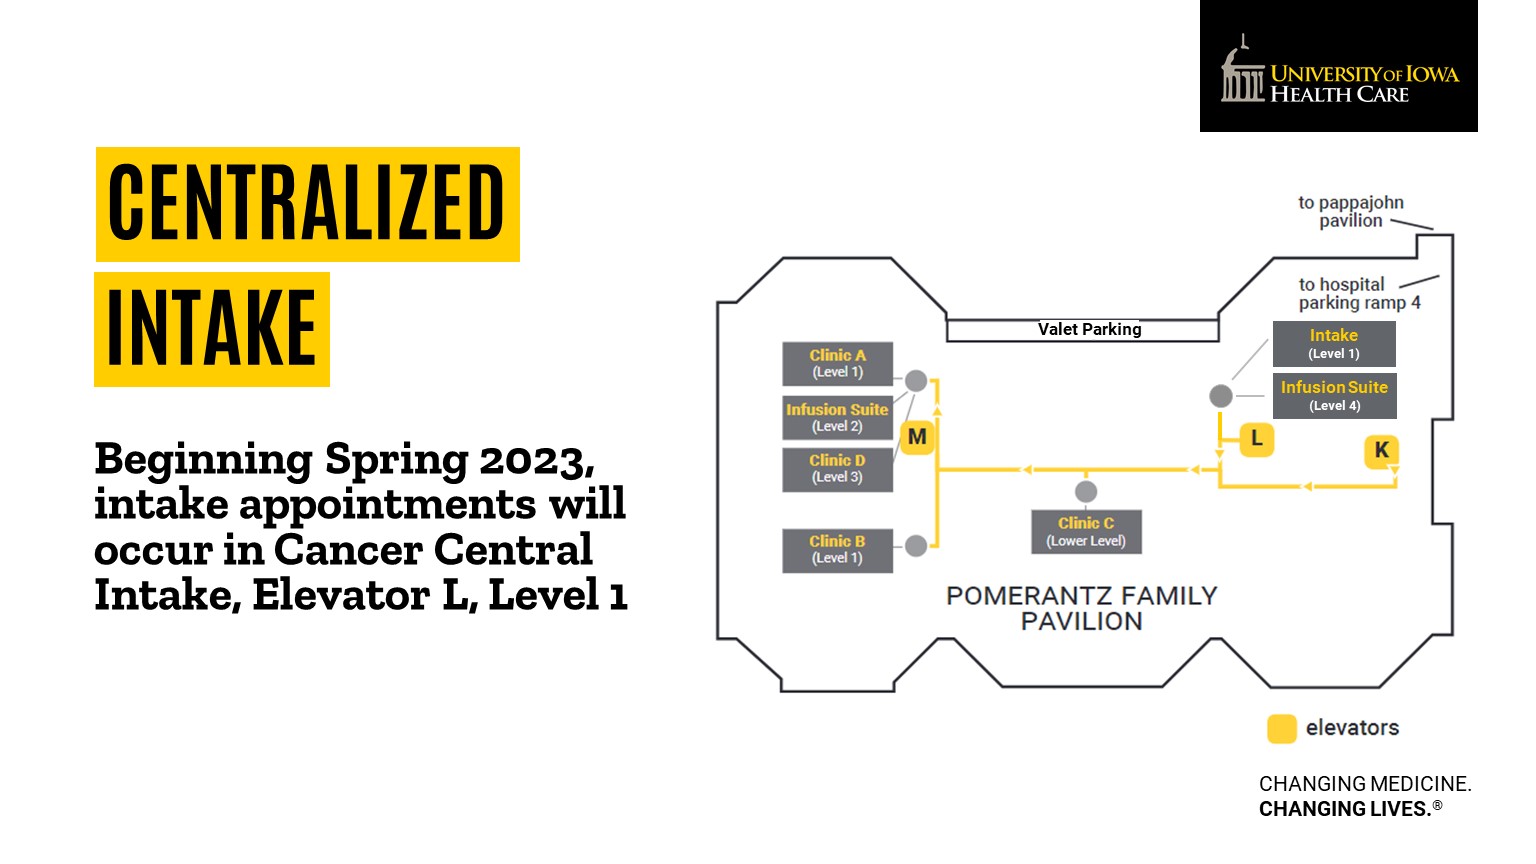 Beginning spring 2023, intake appointments will occur in Cancer Central Intake, Elevator L, Level 1